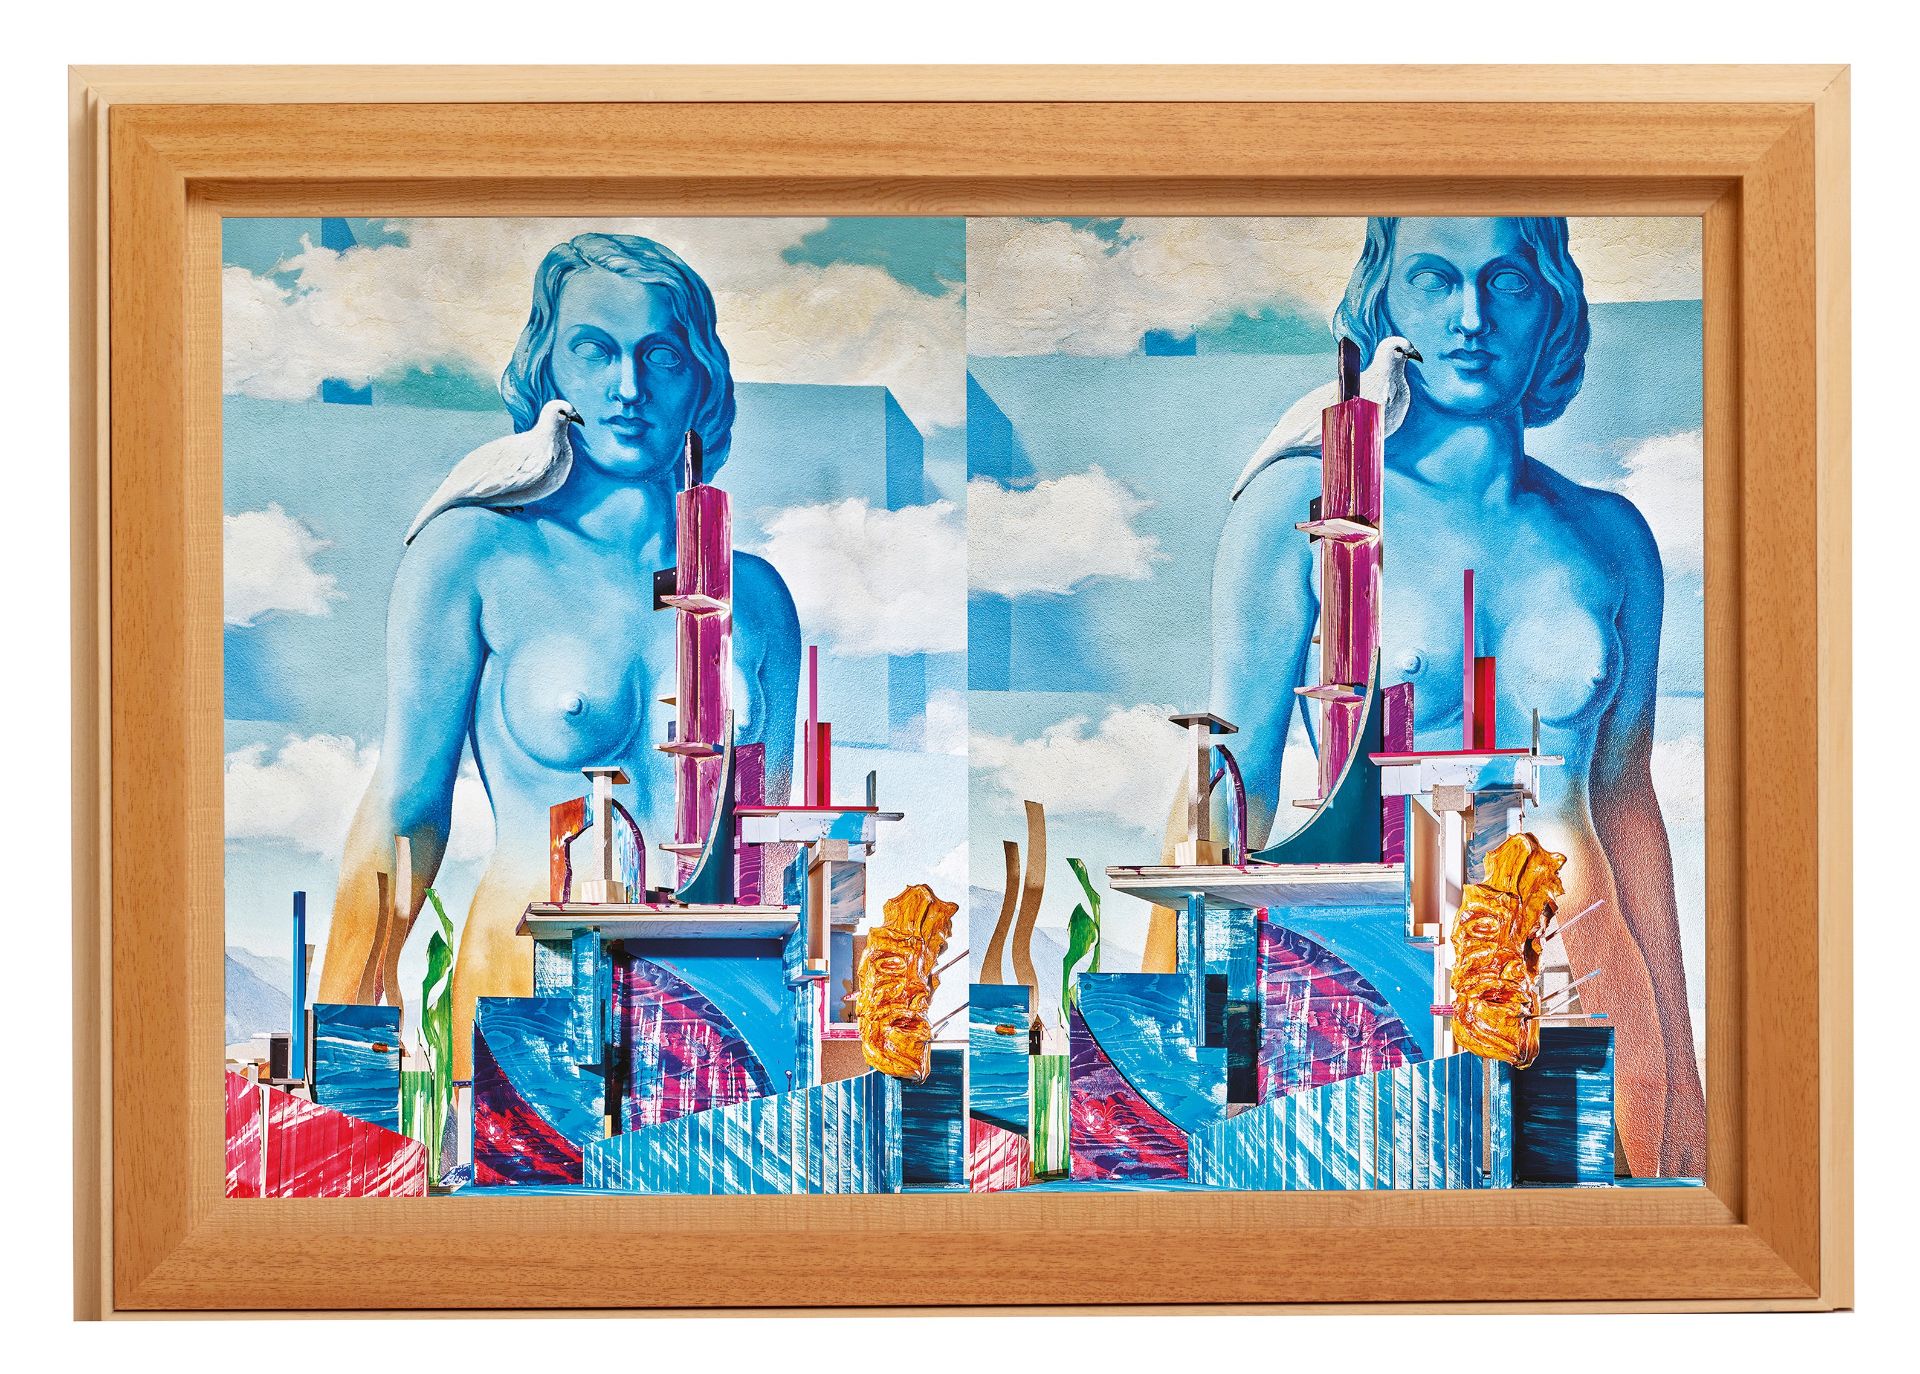 Jan Frederik De Cock (1976, Brussels), 'The New Enchanted Domain, I', 2021, 60 x 91 cm - Image 2 of 4